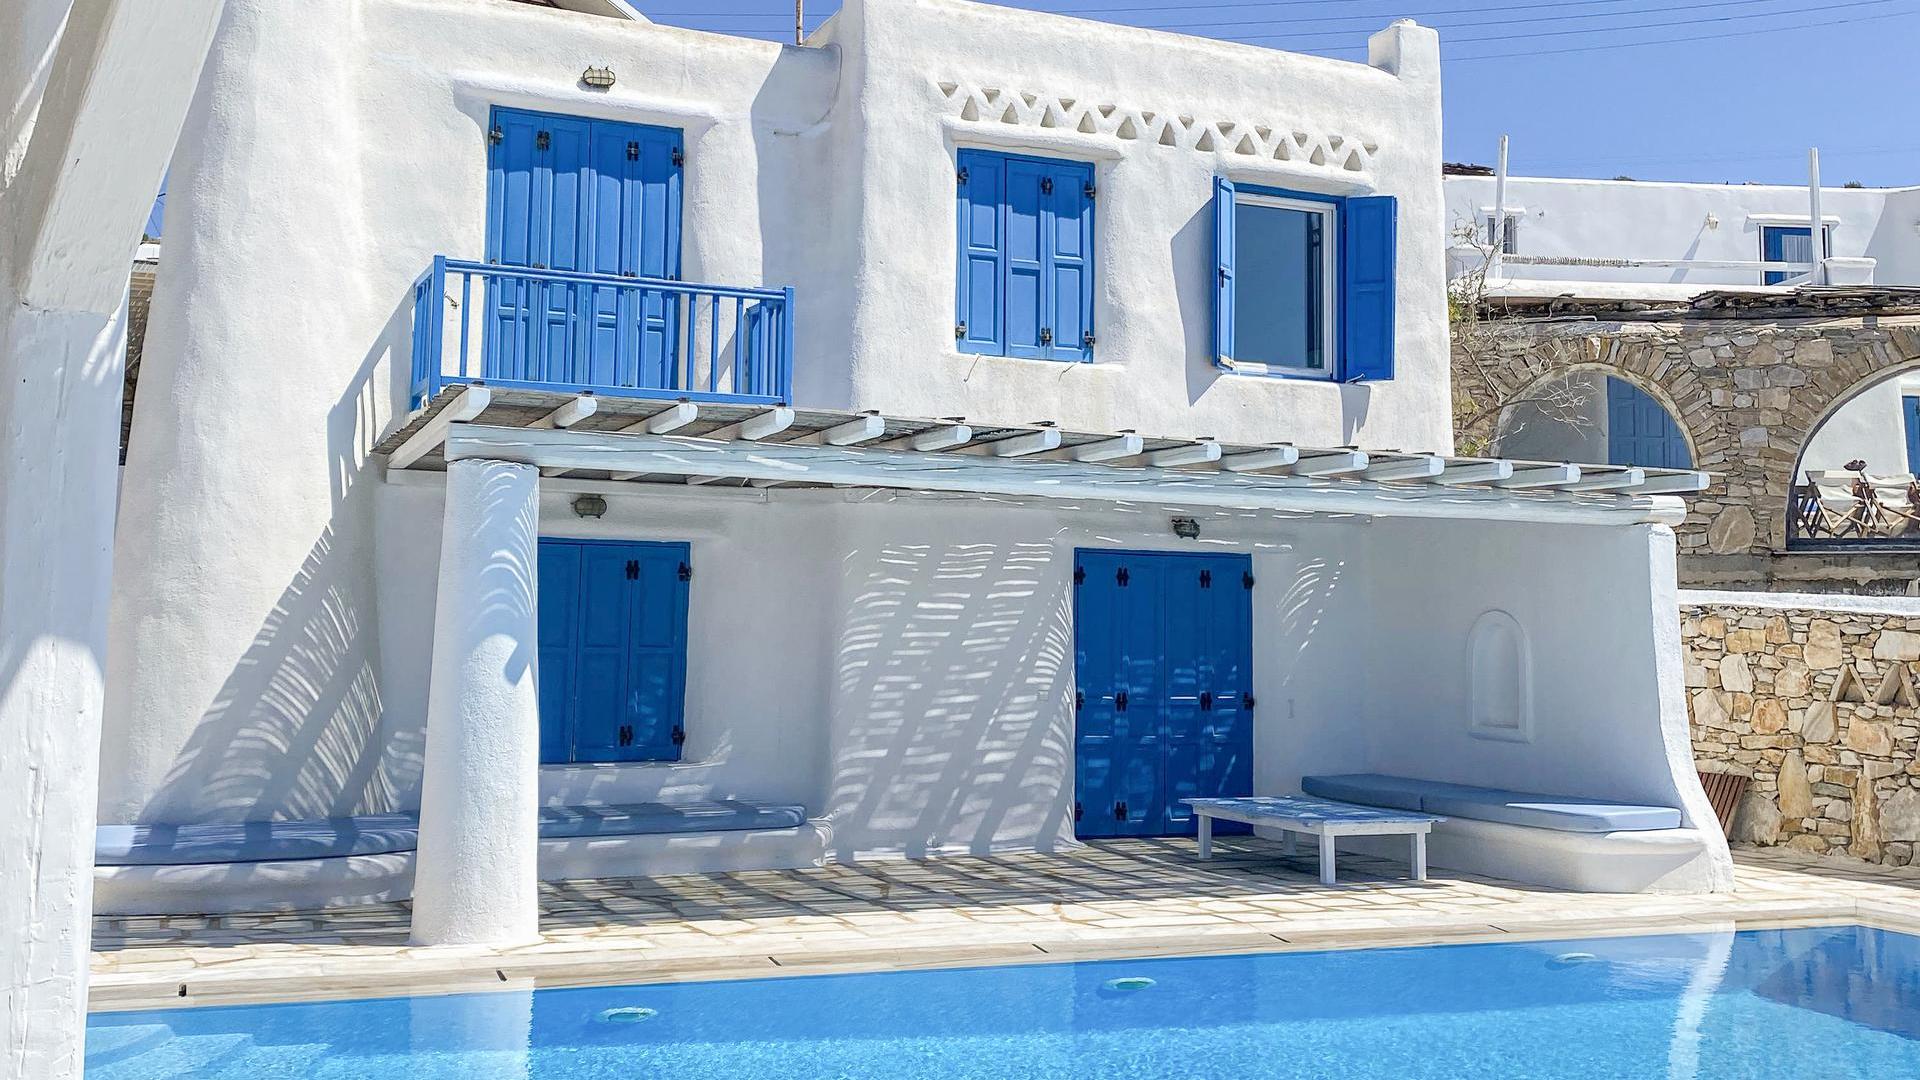 Blue Harmony Suites of Mykonos – Deluxe Suite for 2 guests